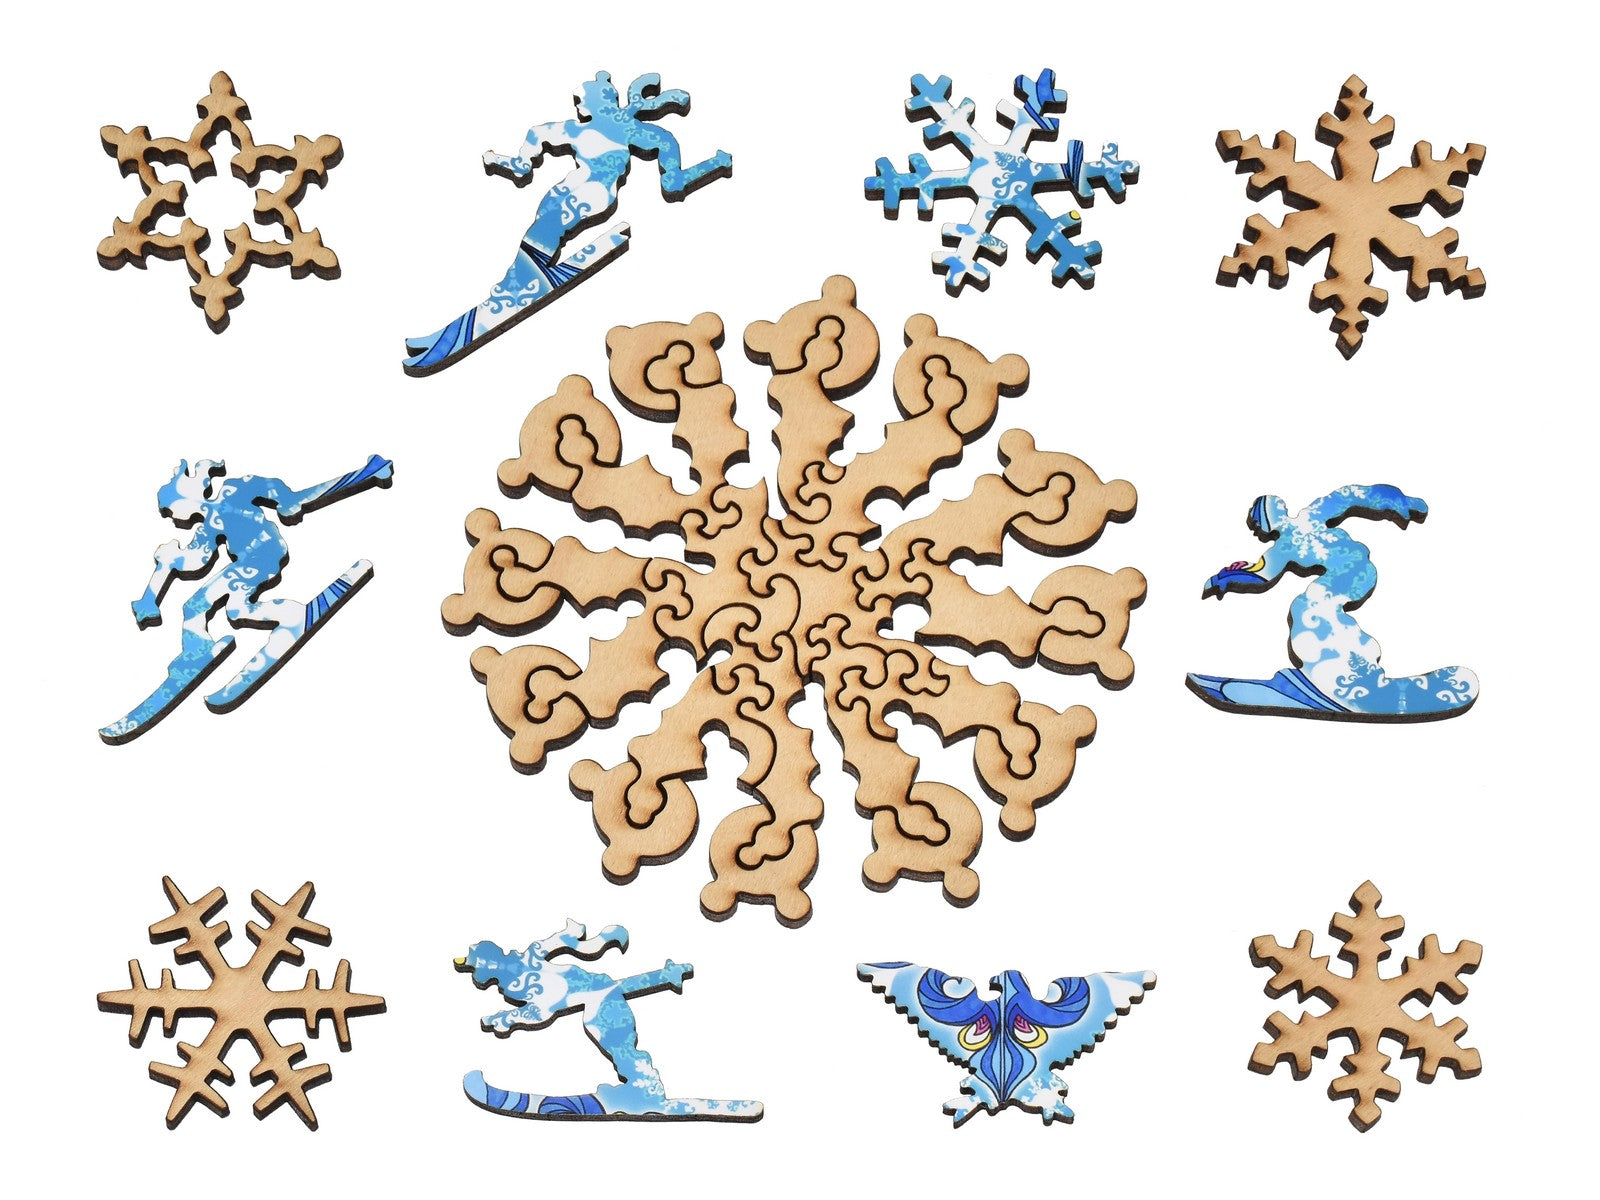 The whimsies that can be found in the puzzle, snowflake.